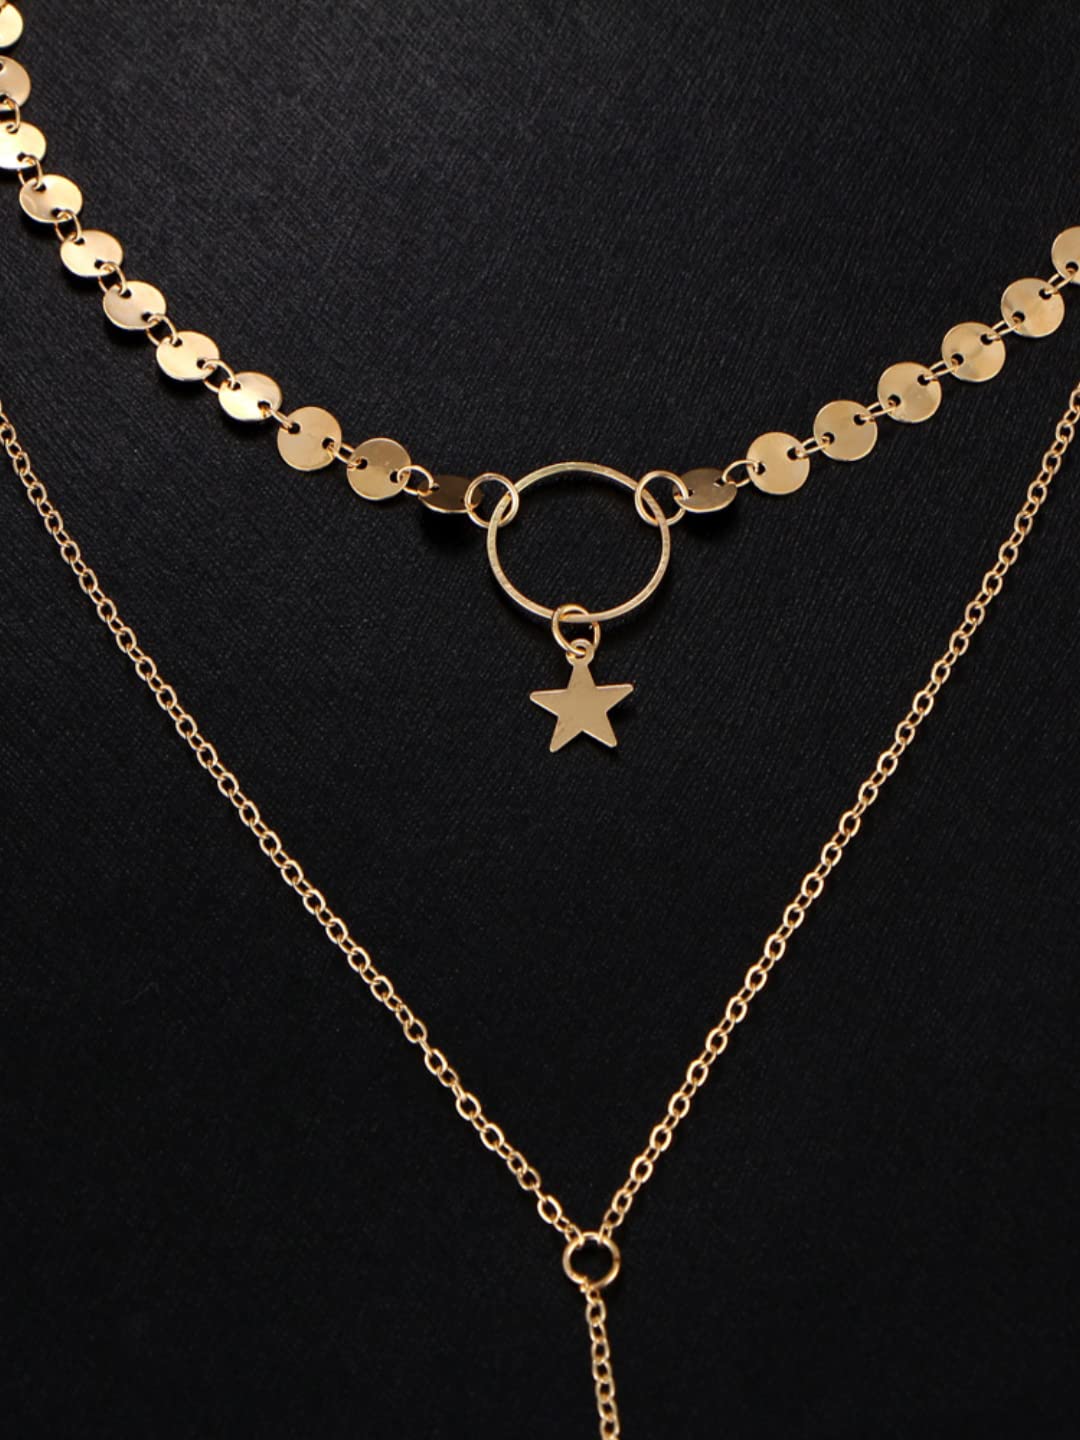 Multi Layer Chain Necklace for Girls | FashionCrab.com